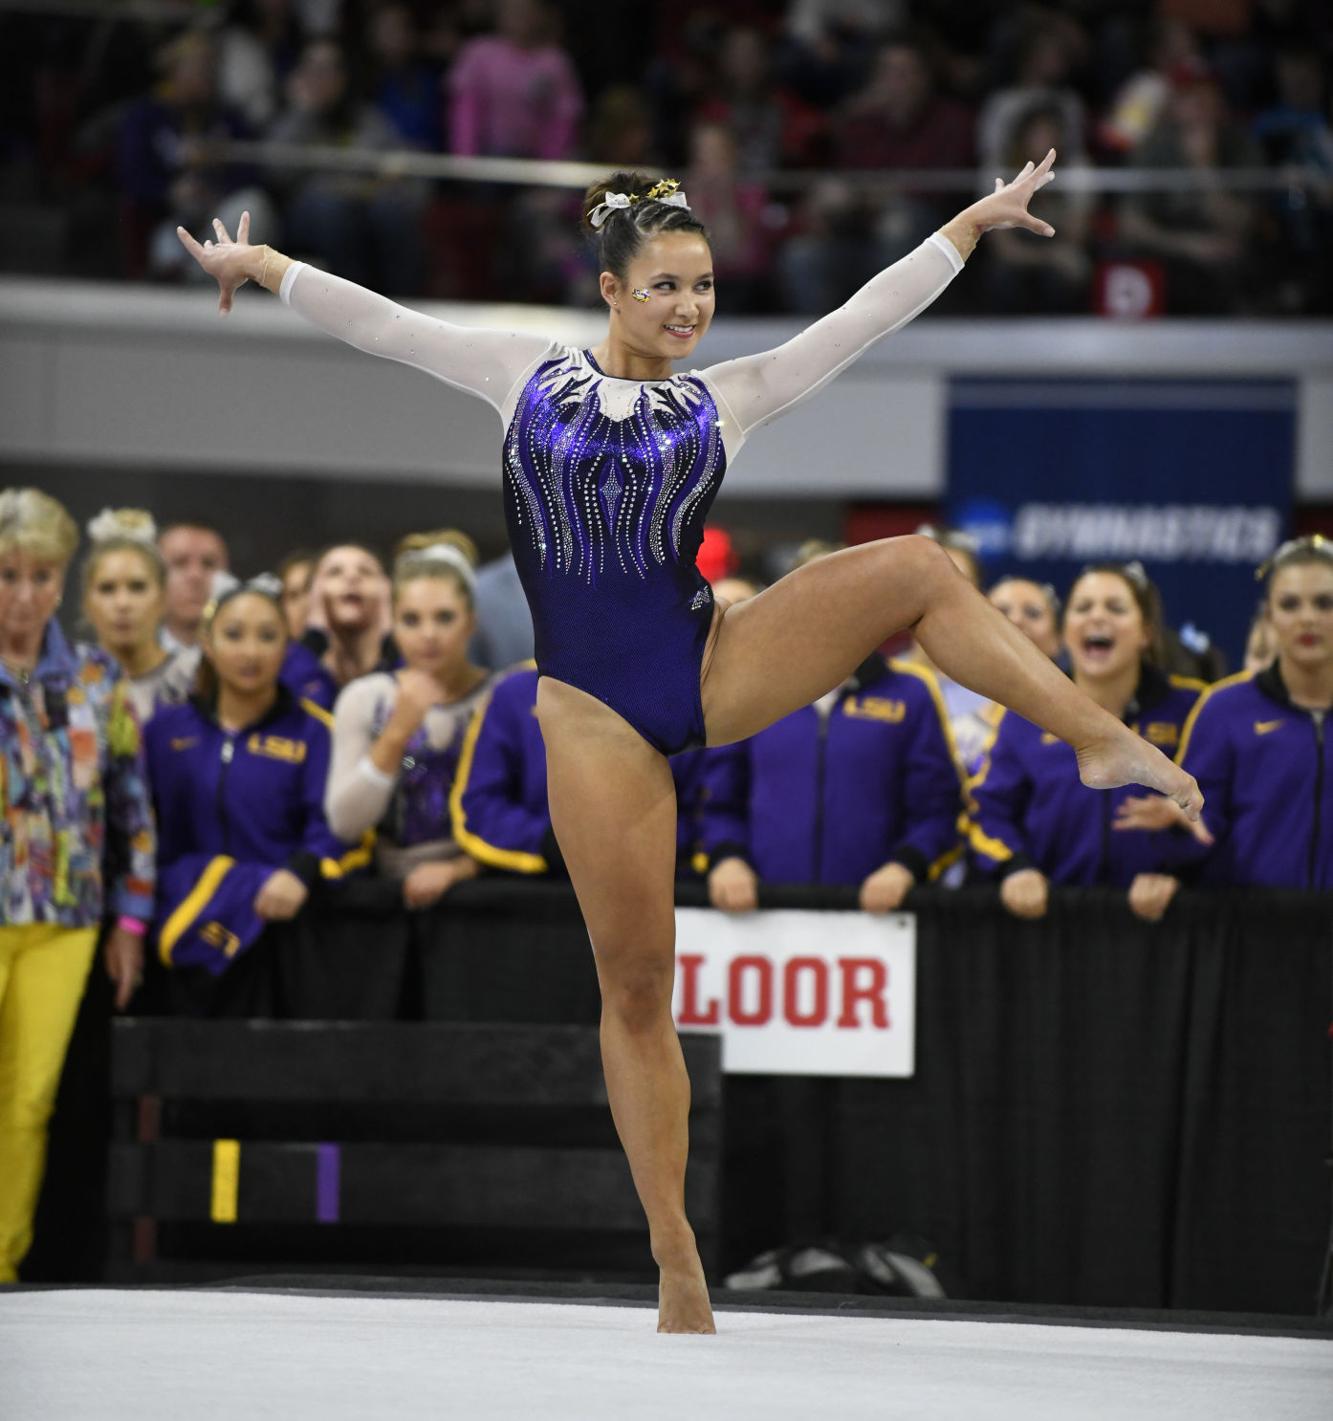 Getting You Ready For The Ncaa Gymnastics Championships Team Capsules Schedule Tv Times Lsu